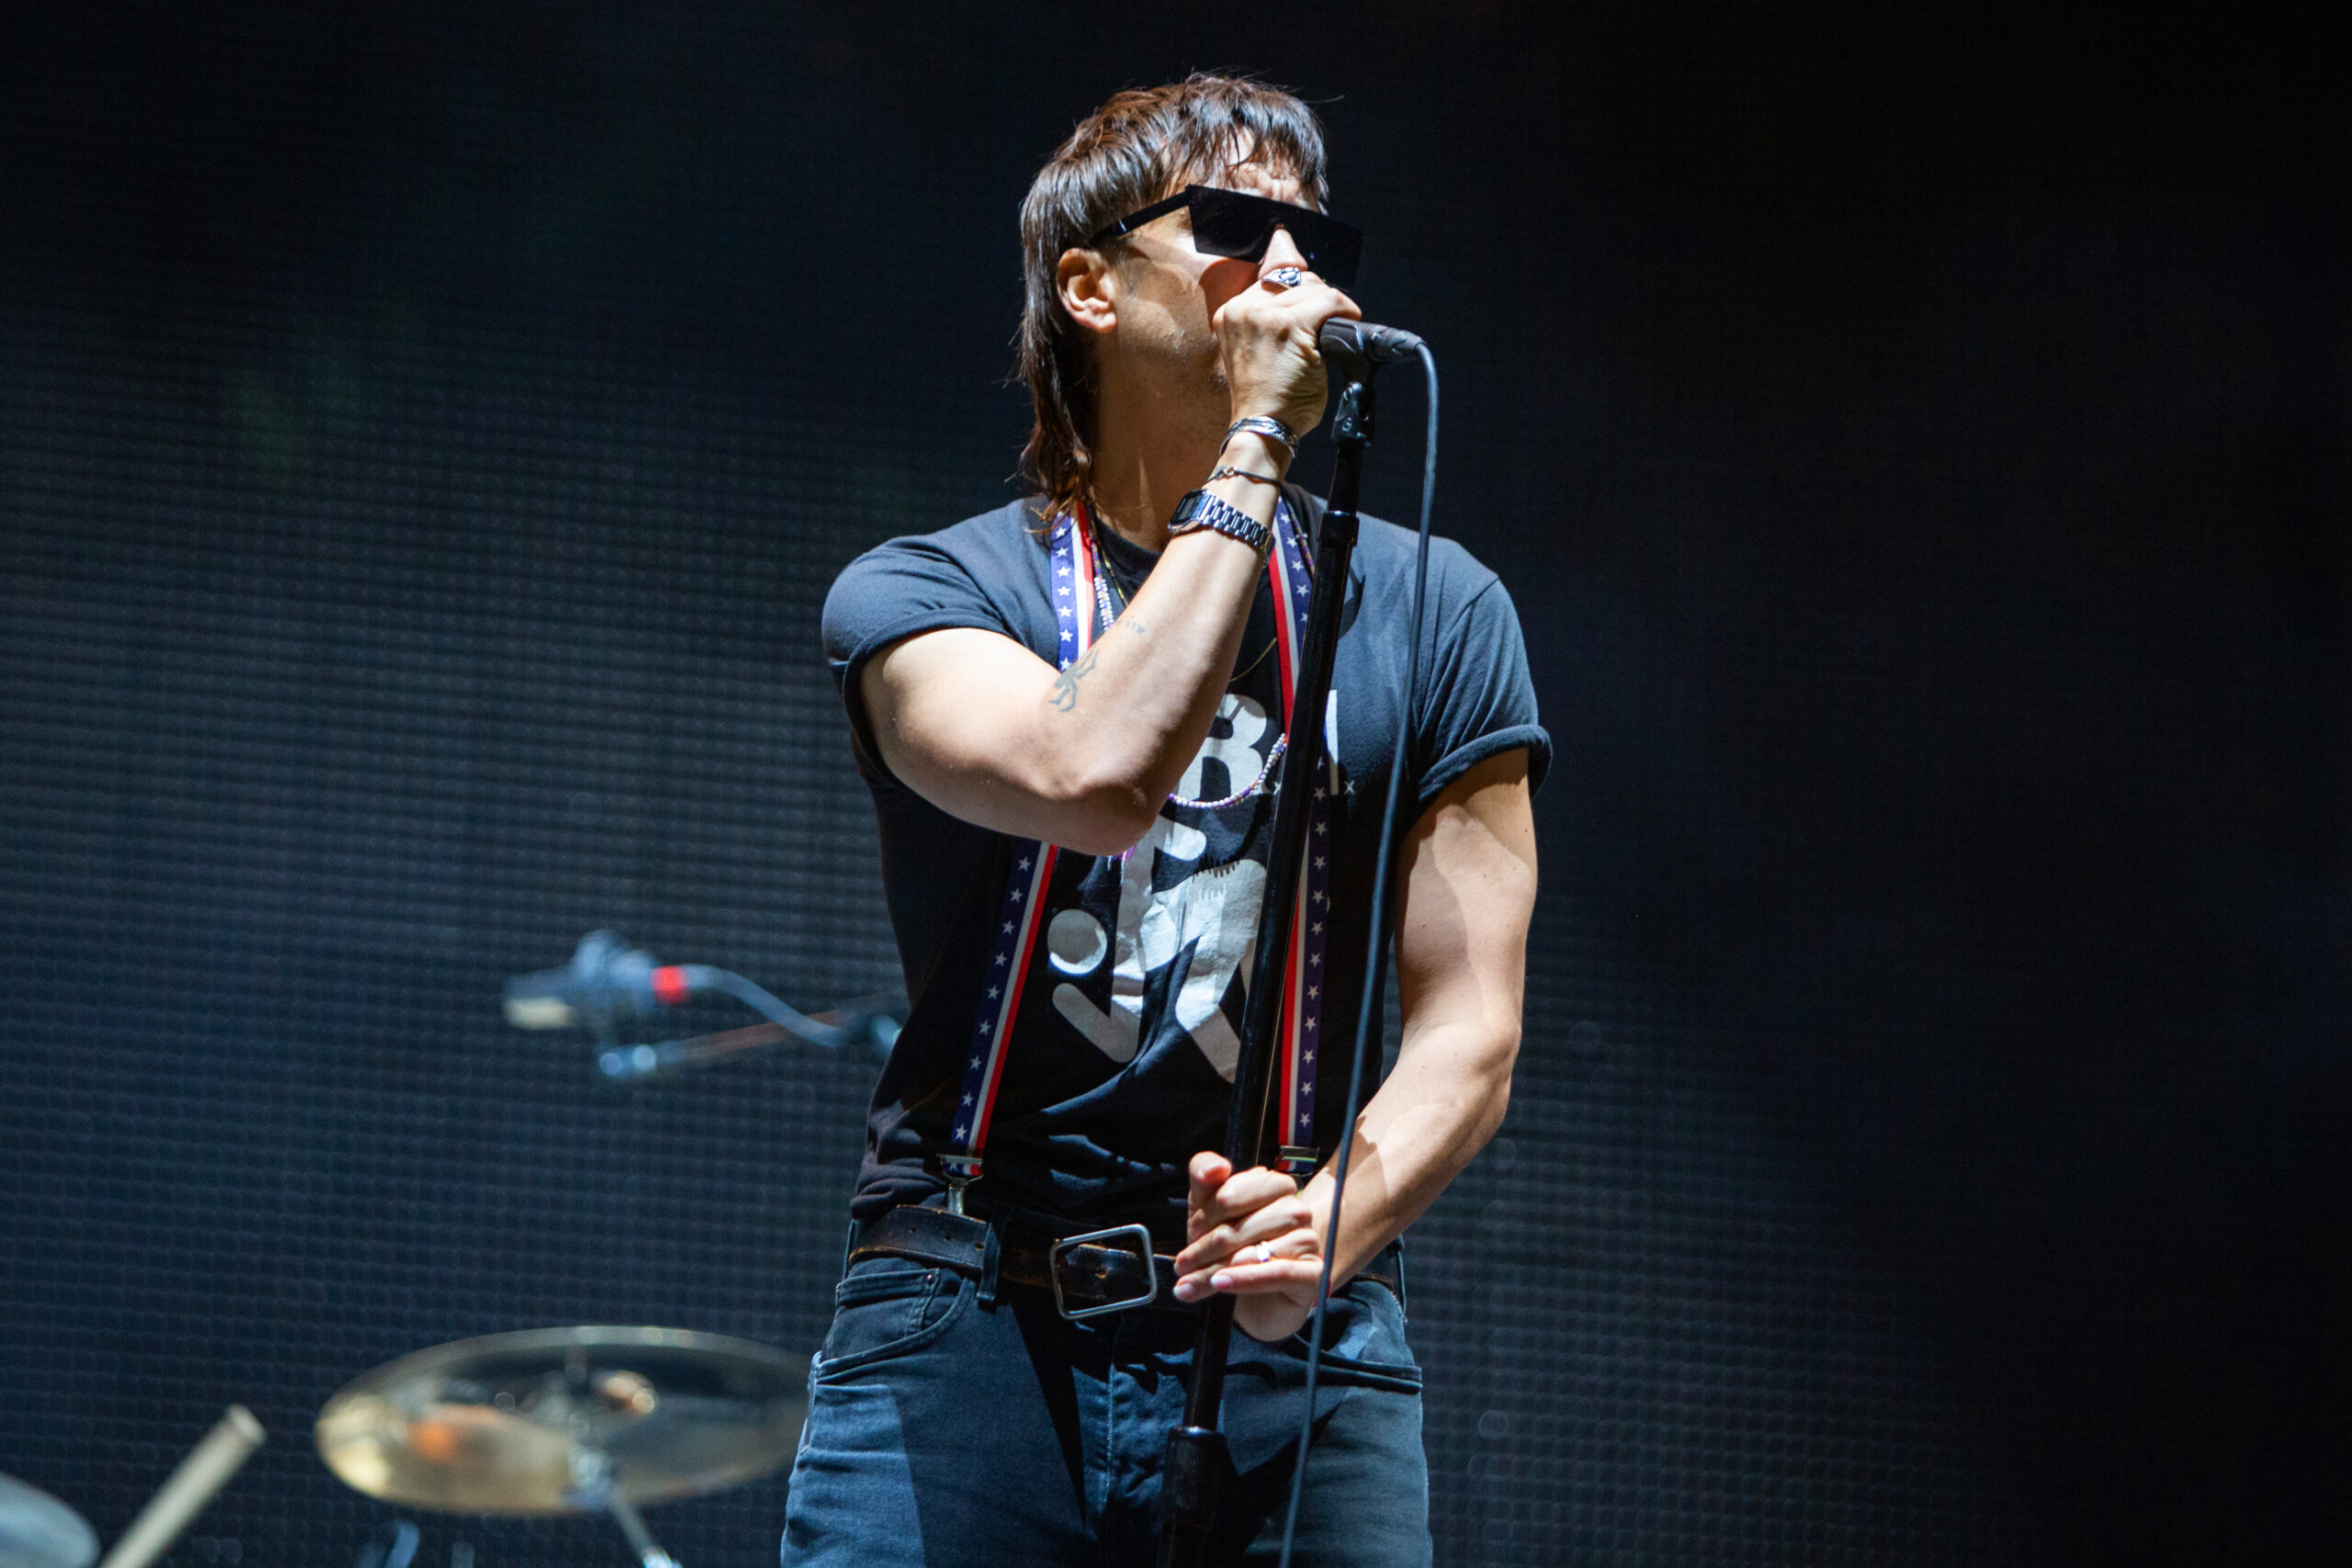 CHICAGO, IL - AUGUST 01:  Julian Casablancas of The Strokes performs at Lollapalooza 2019 at Grant Park on August 1, 2019 in Chicago, Illinois.  (Photo by Barry Brecheisen/WireImage)